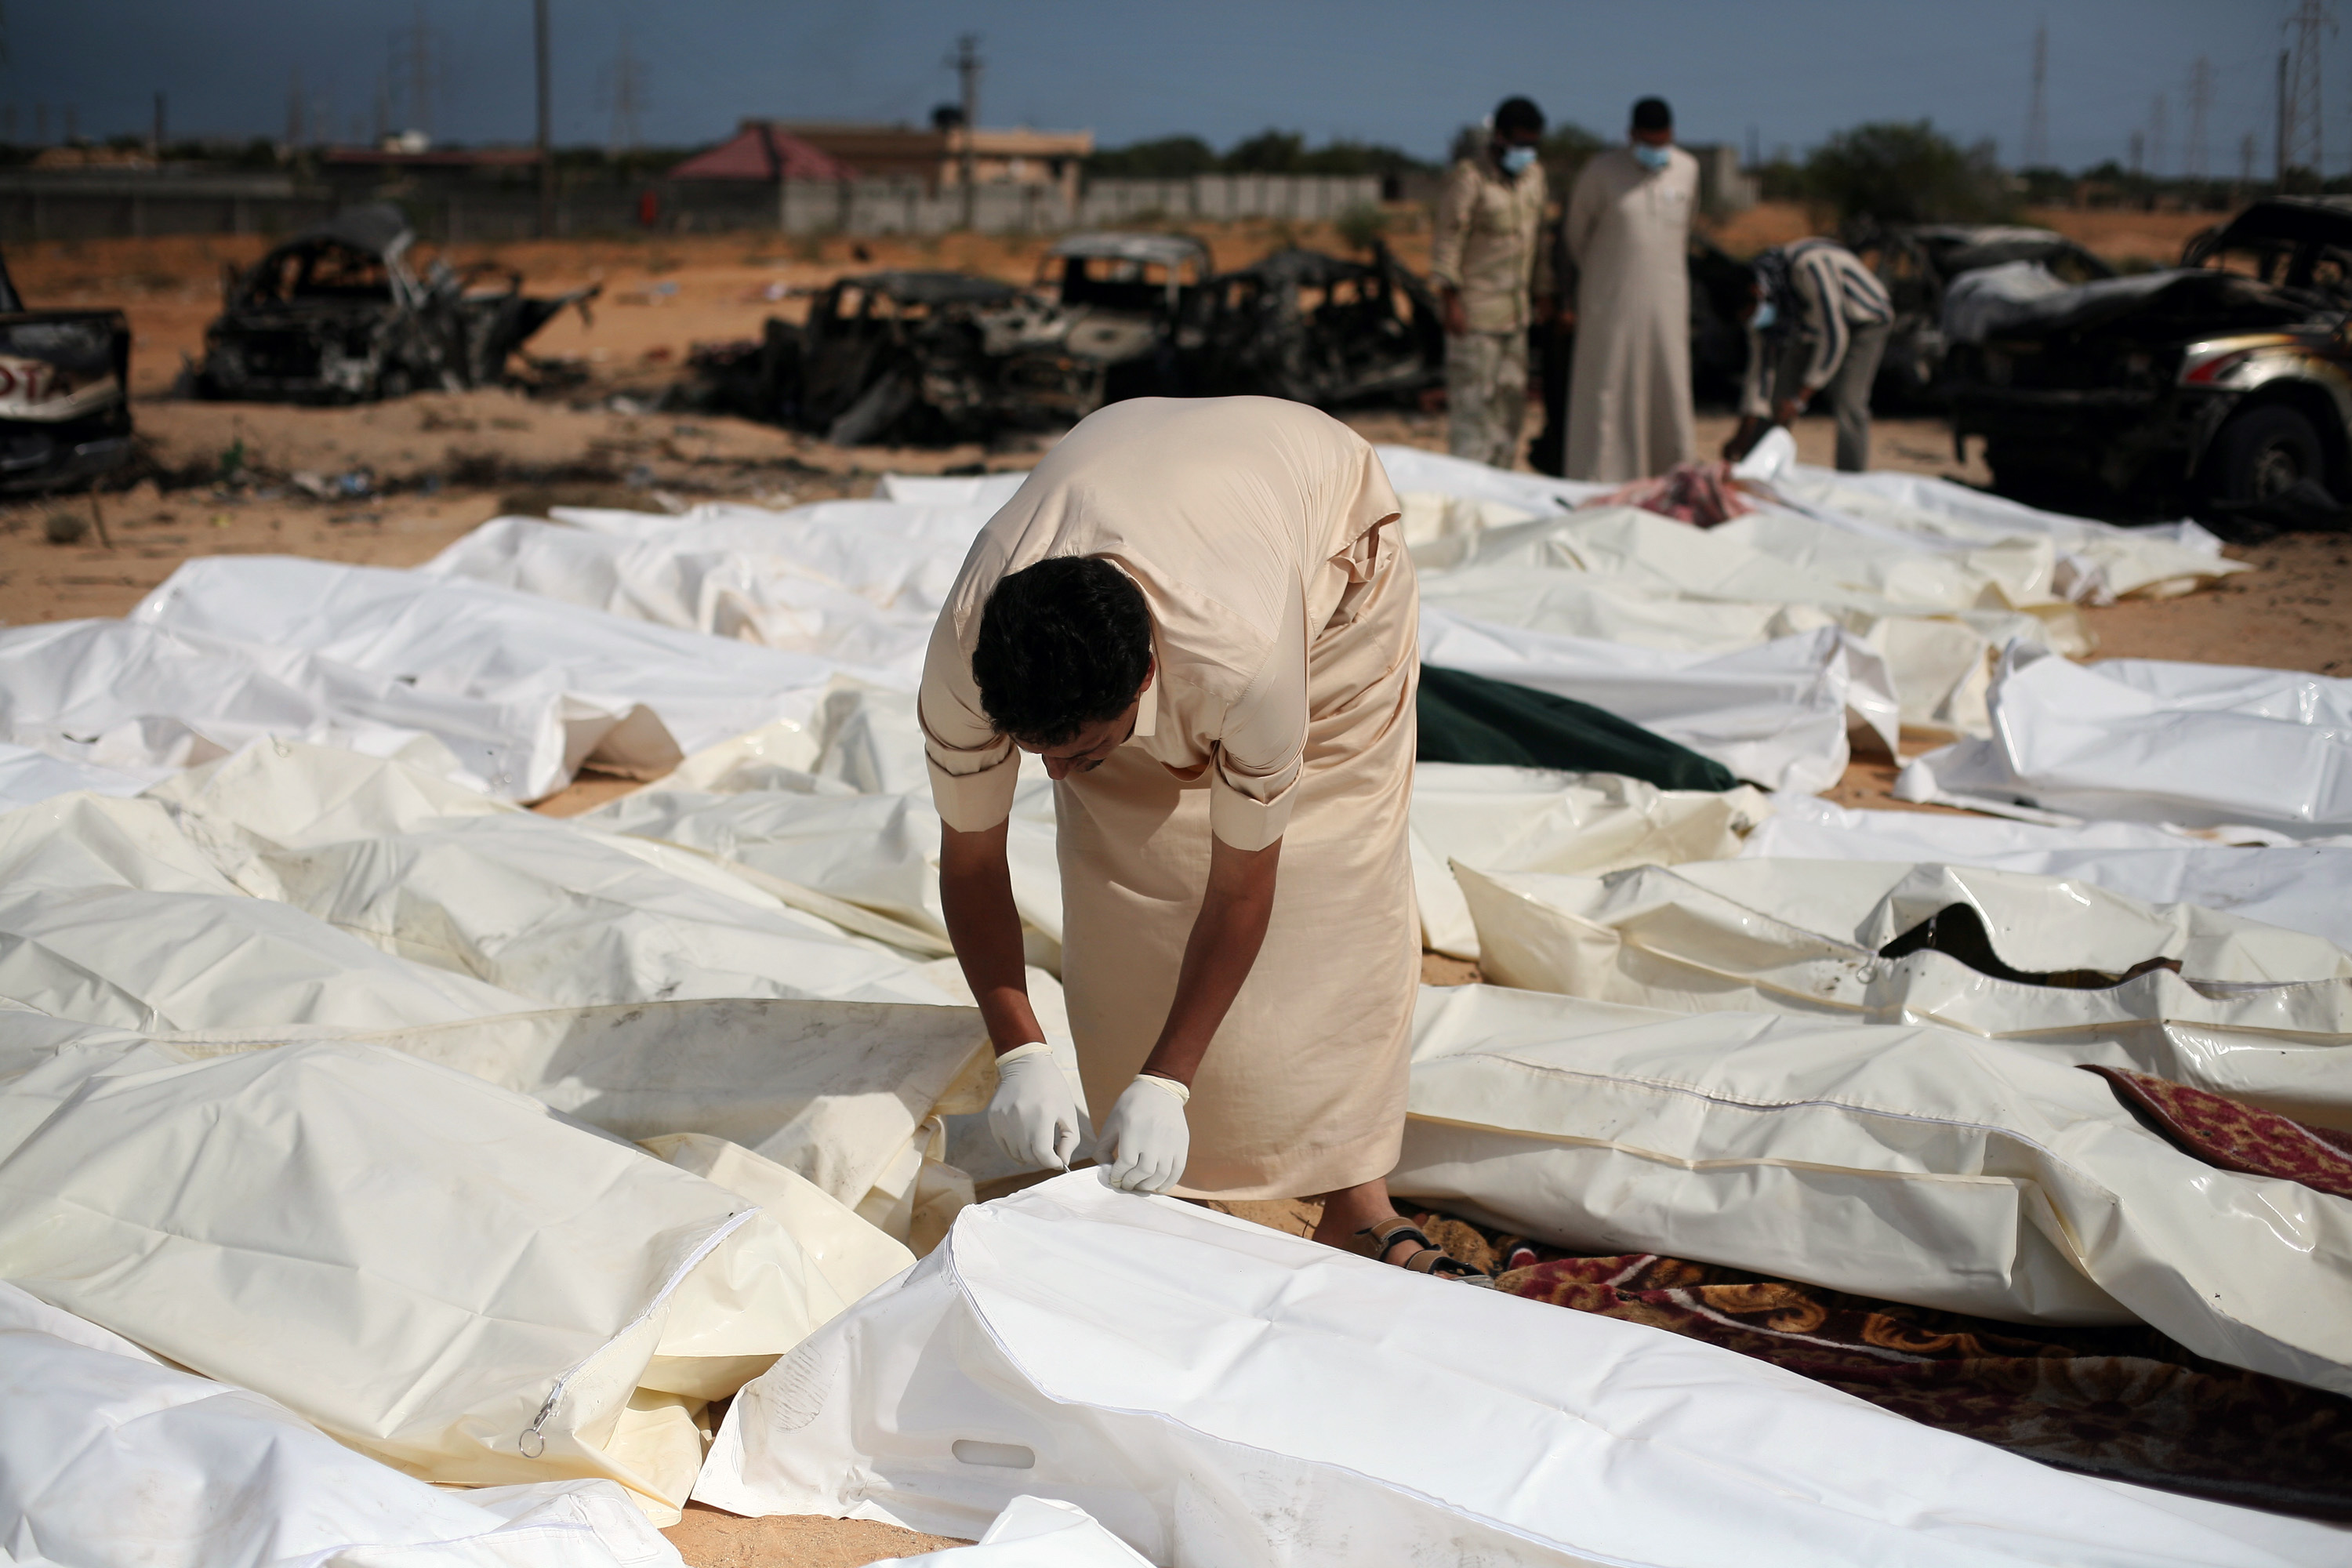 FILE - In this Oct. 22, 2011 file photo, a revolutionary fighter zips a body bag containing one of nearly 30 bodies of Gadhafi loyalists killed in Sirte, Libya, during the city's fall. Libyan rebels appear to have 